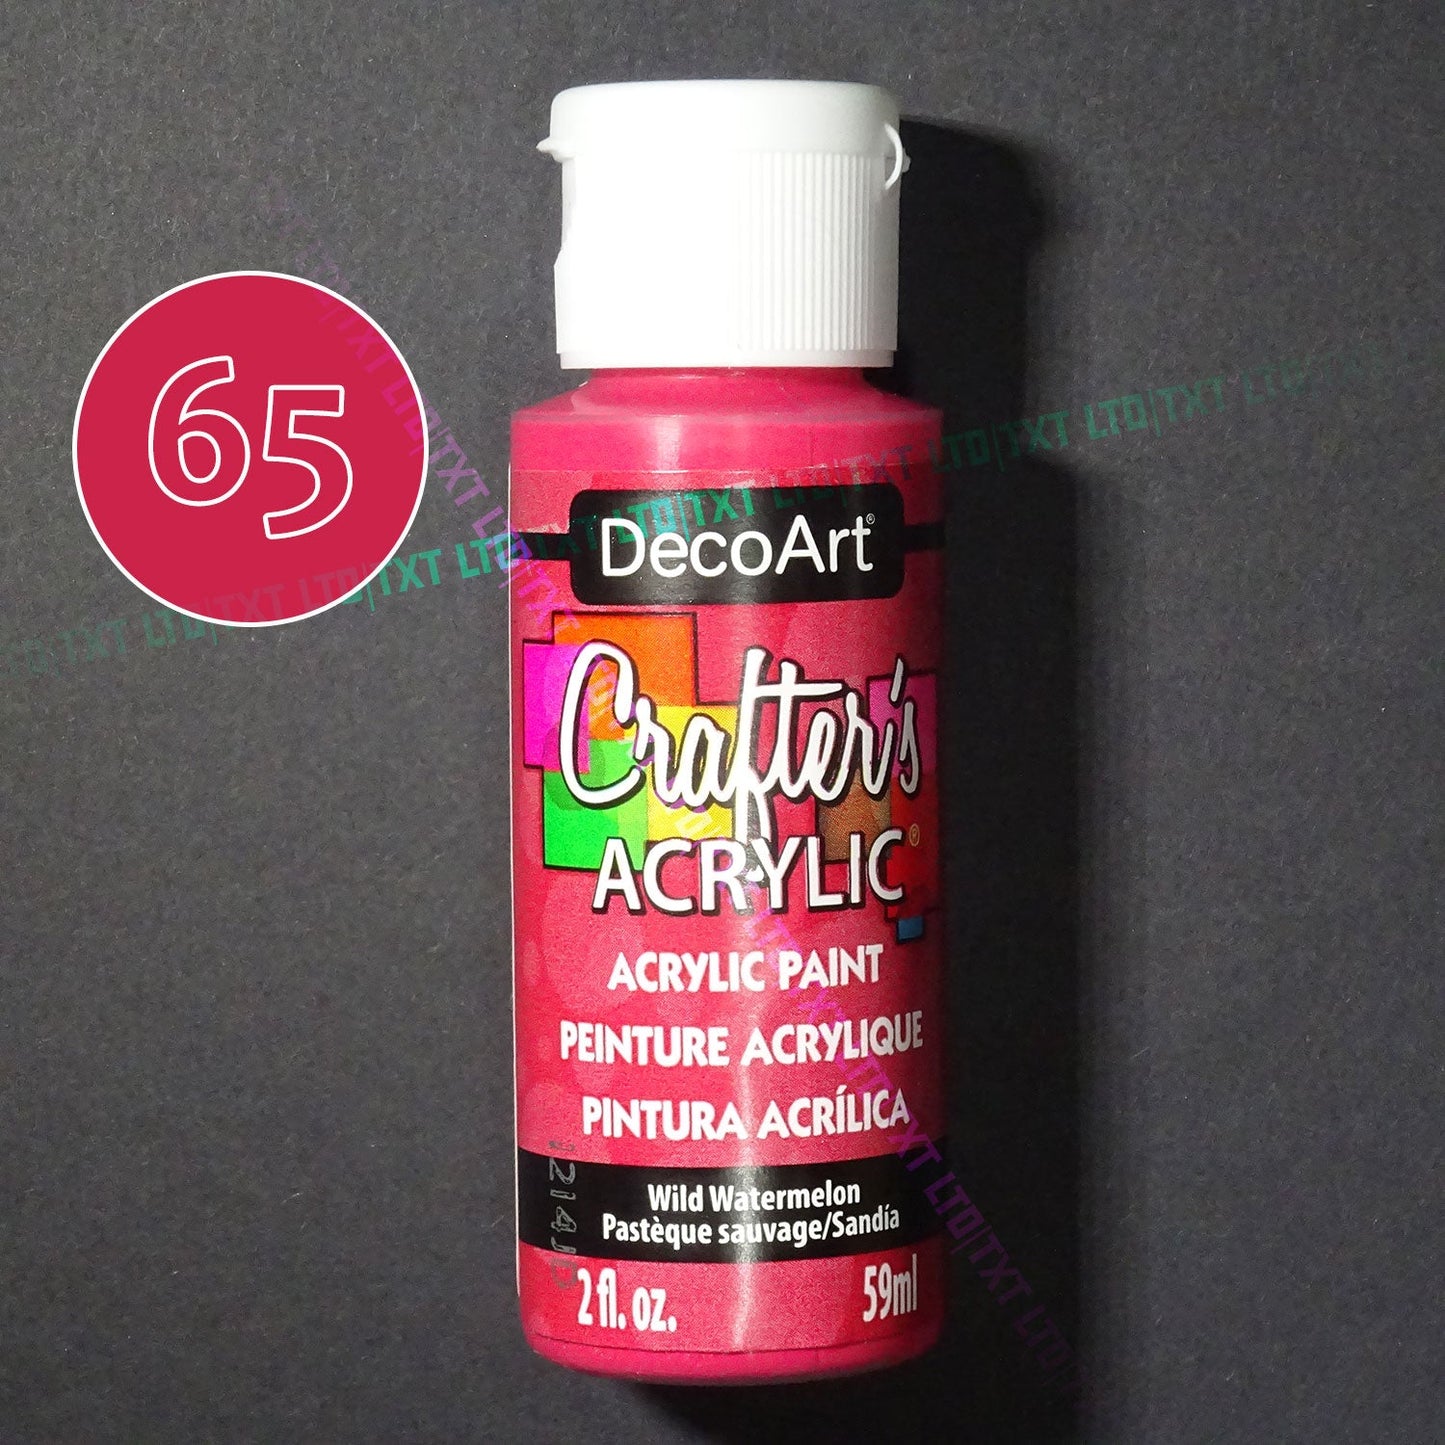 DecoArt Crafters Acryl, 59ml/2oz. [colours 1 to 103]